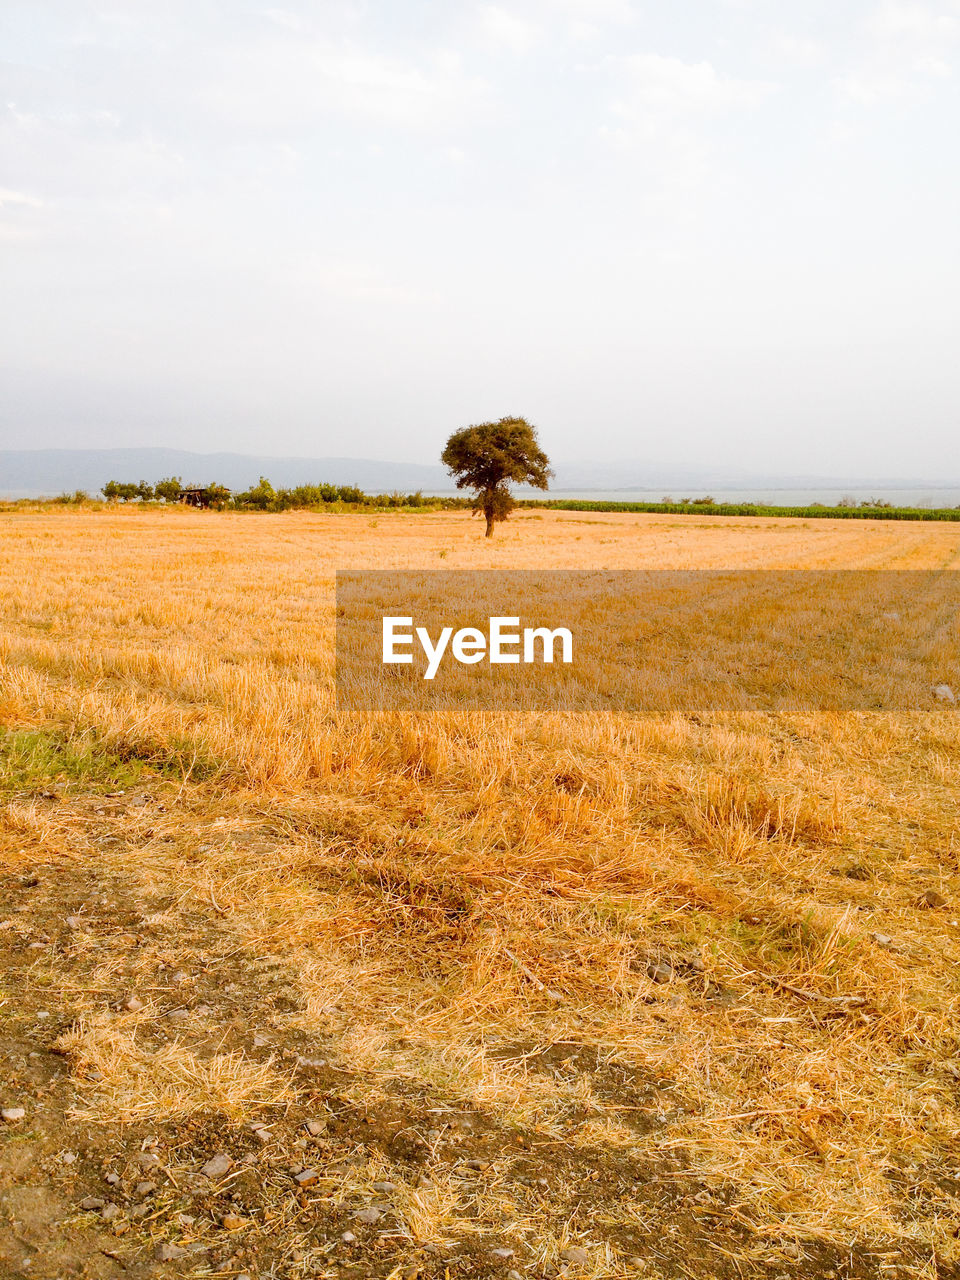 Scenic view of empty wheat field field against sky and a tree in the middle